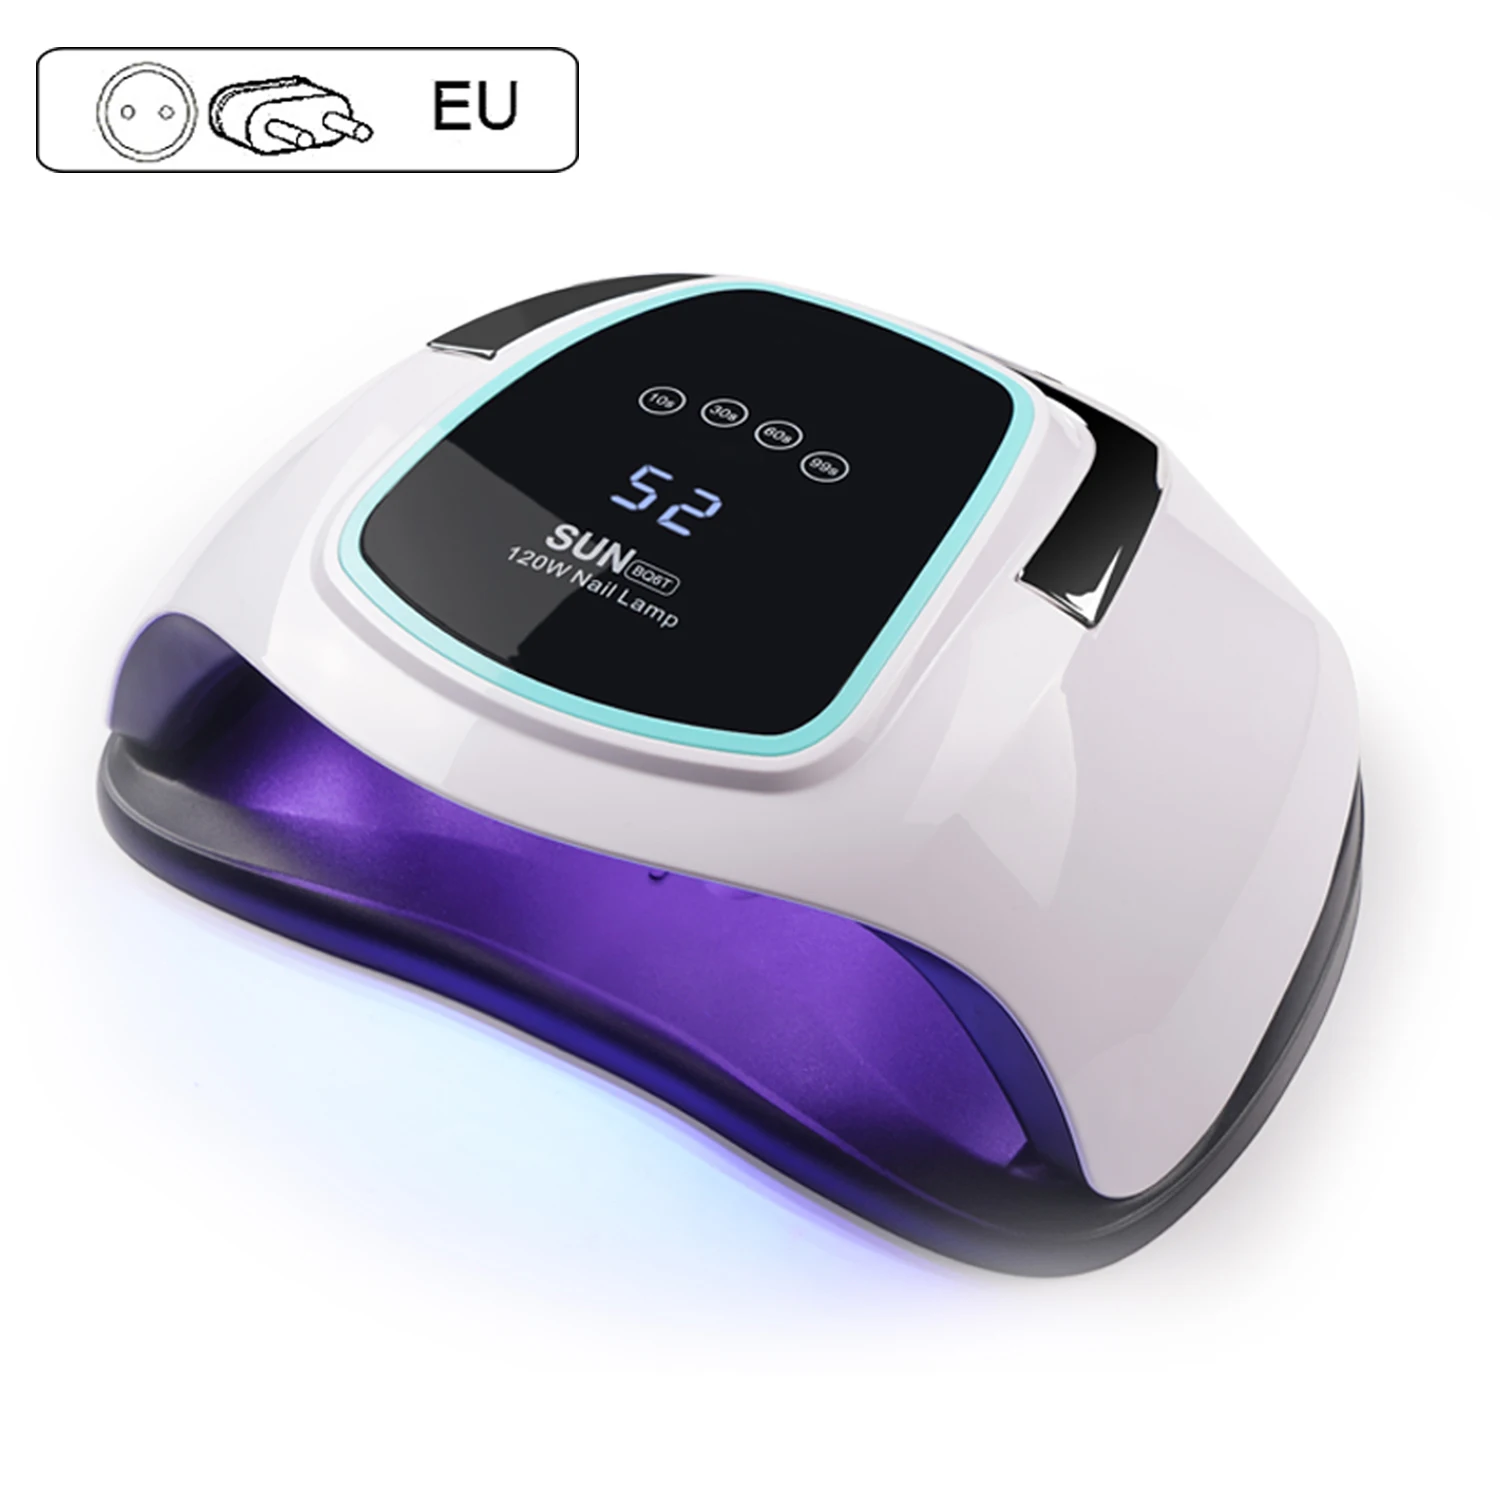 SUN BQ6T 72W Nail Lamp Drying for Gel Varnish UV LED Lamp for Nails Dryer Drying for Manicure Gel LCD Screen Nail Dryer - Color: EU Plug